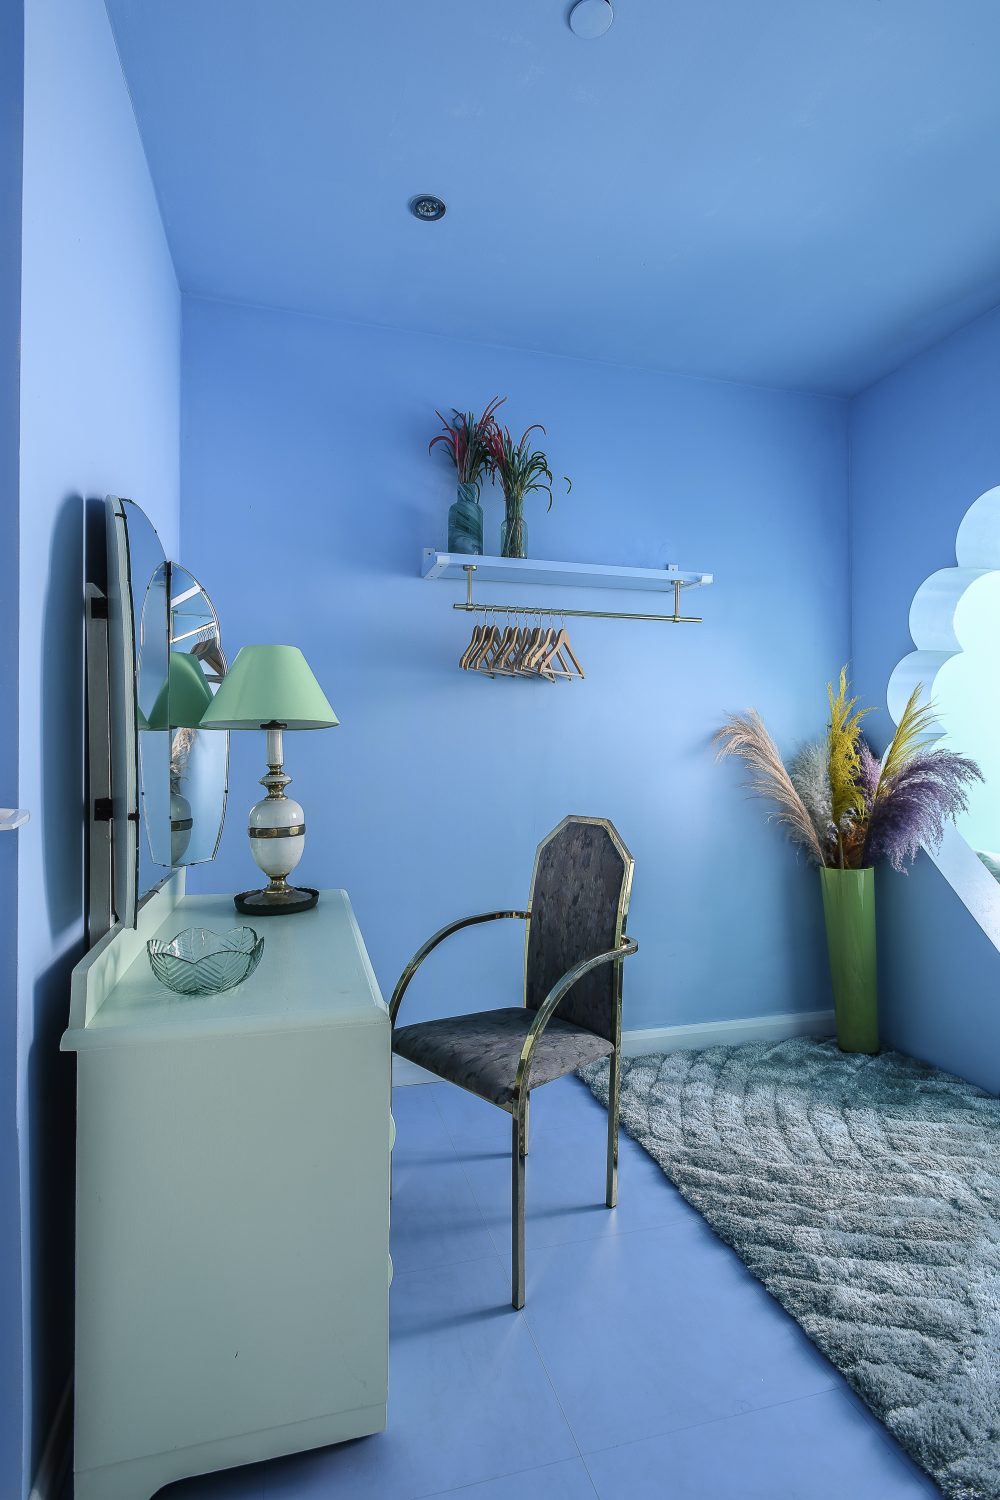 The rooms seem to glow from the inside out with coral pinks and orange in the main bedroom and aqua green and blue in the Mermaid Room, above